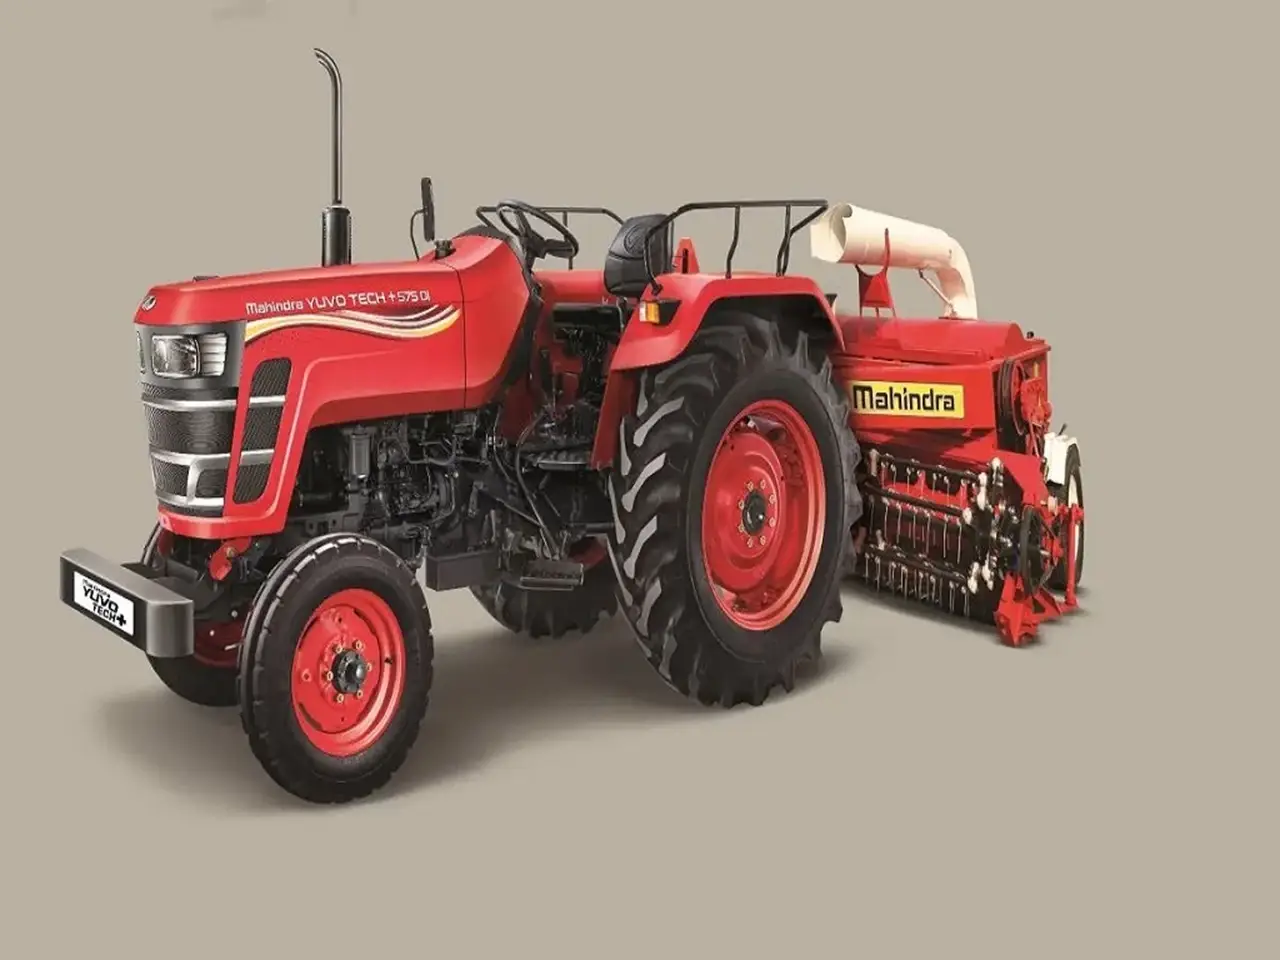 Tractors with 50 HP are dependable and simple to use, according to farmers.